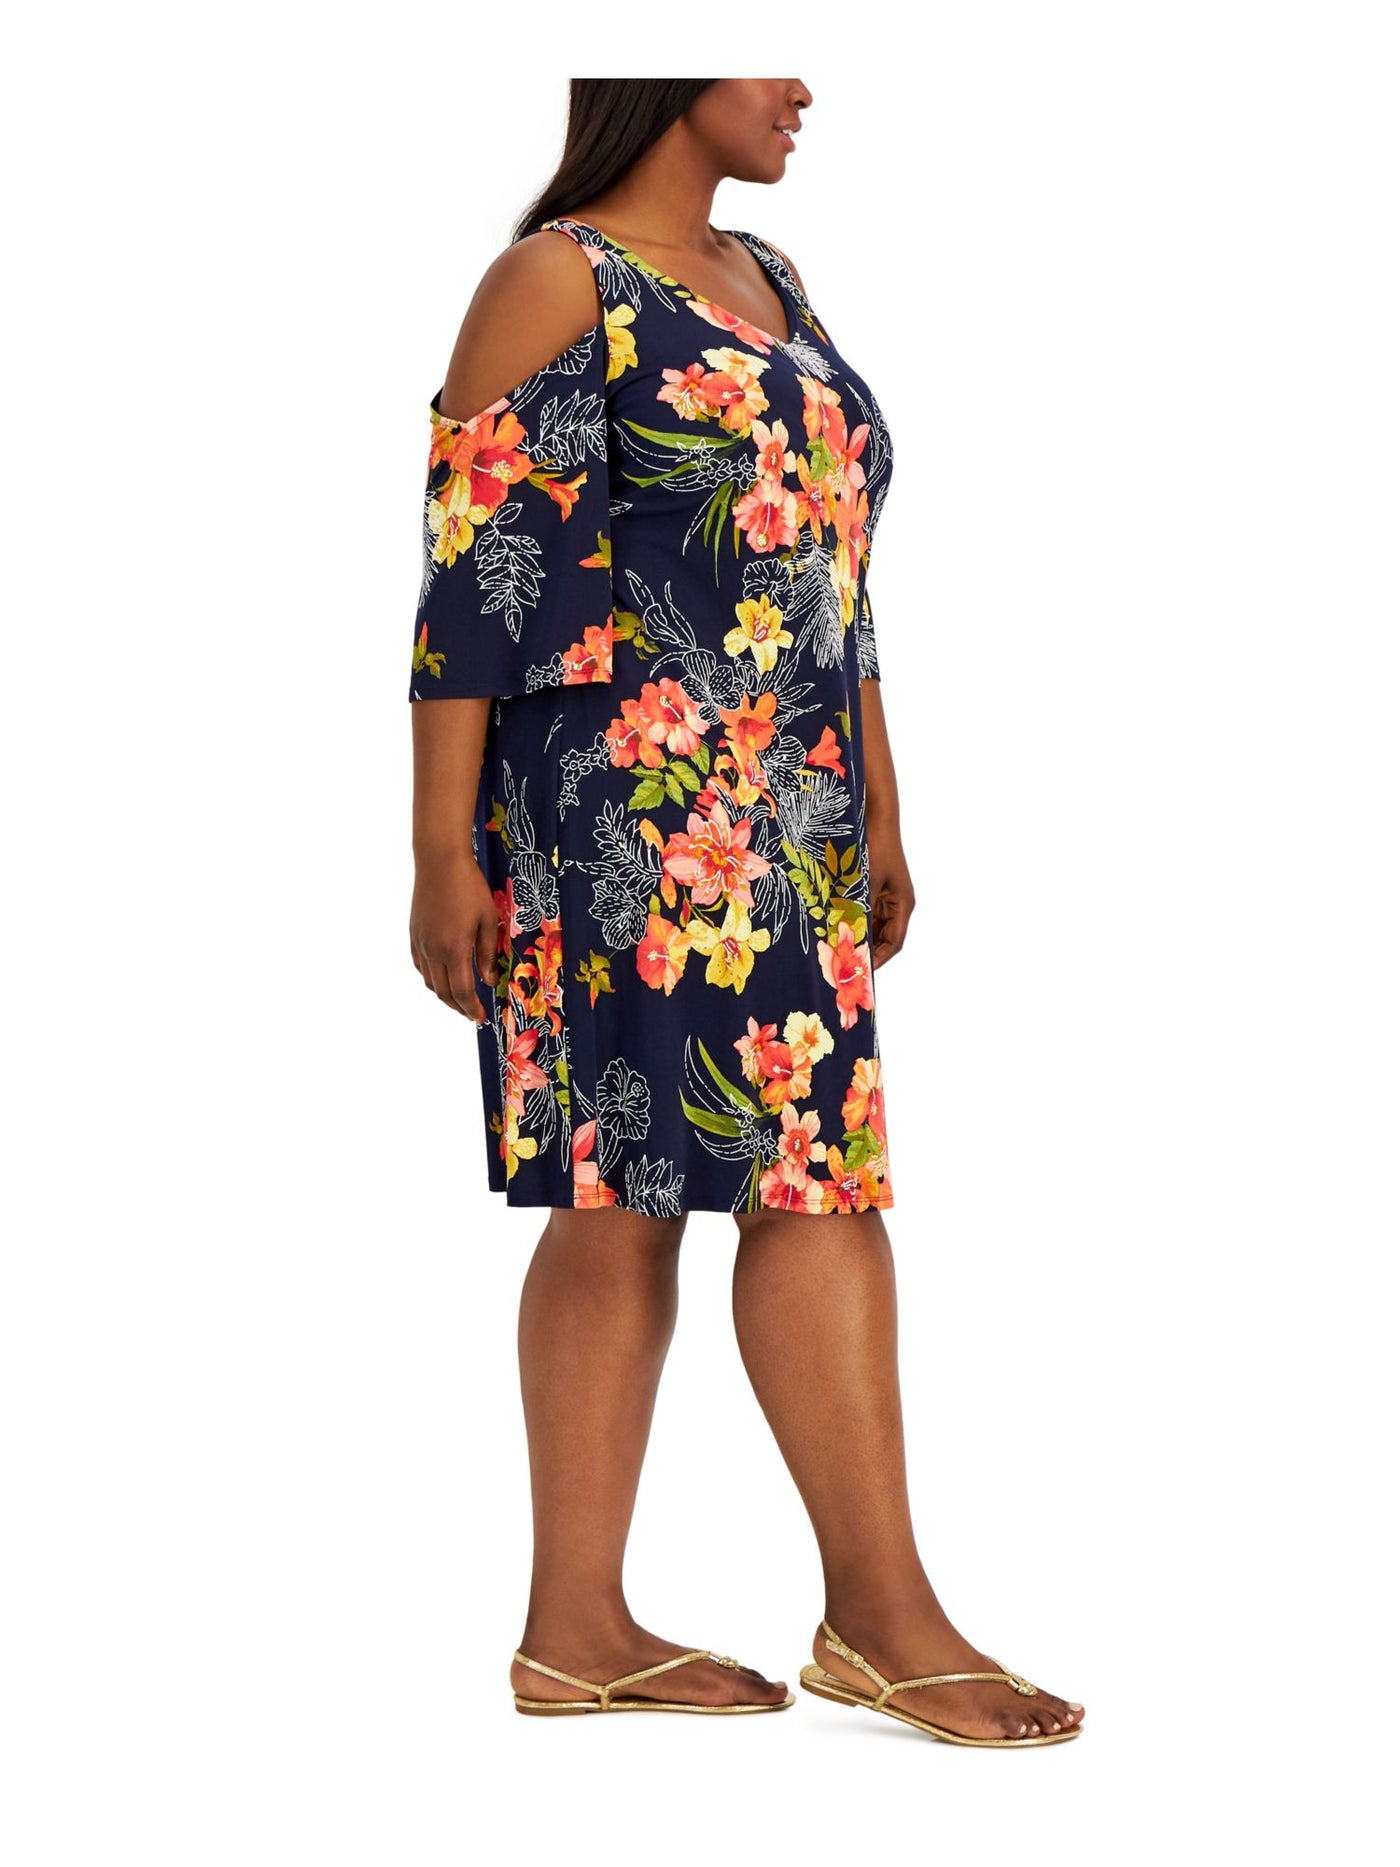 CONNECTED APPAREL Womens Navy Cold Shoulder Pullover Unlined Floral 3/4 Sleeve V Neck Knee Length Fit + Flare Dress Plus 18W